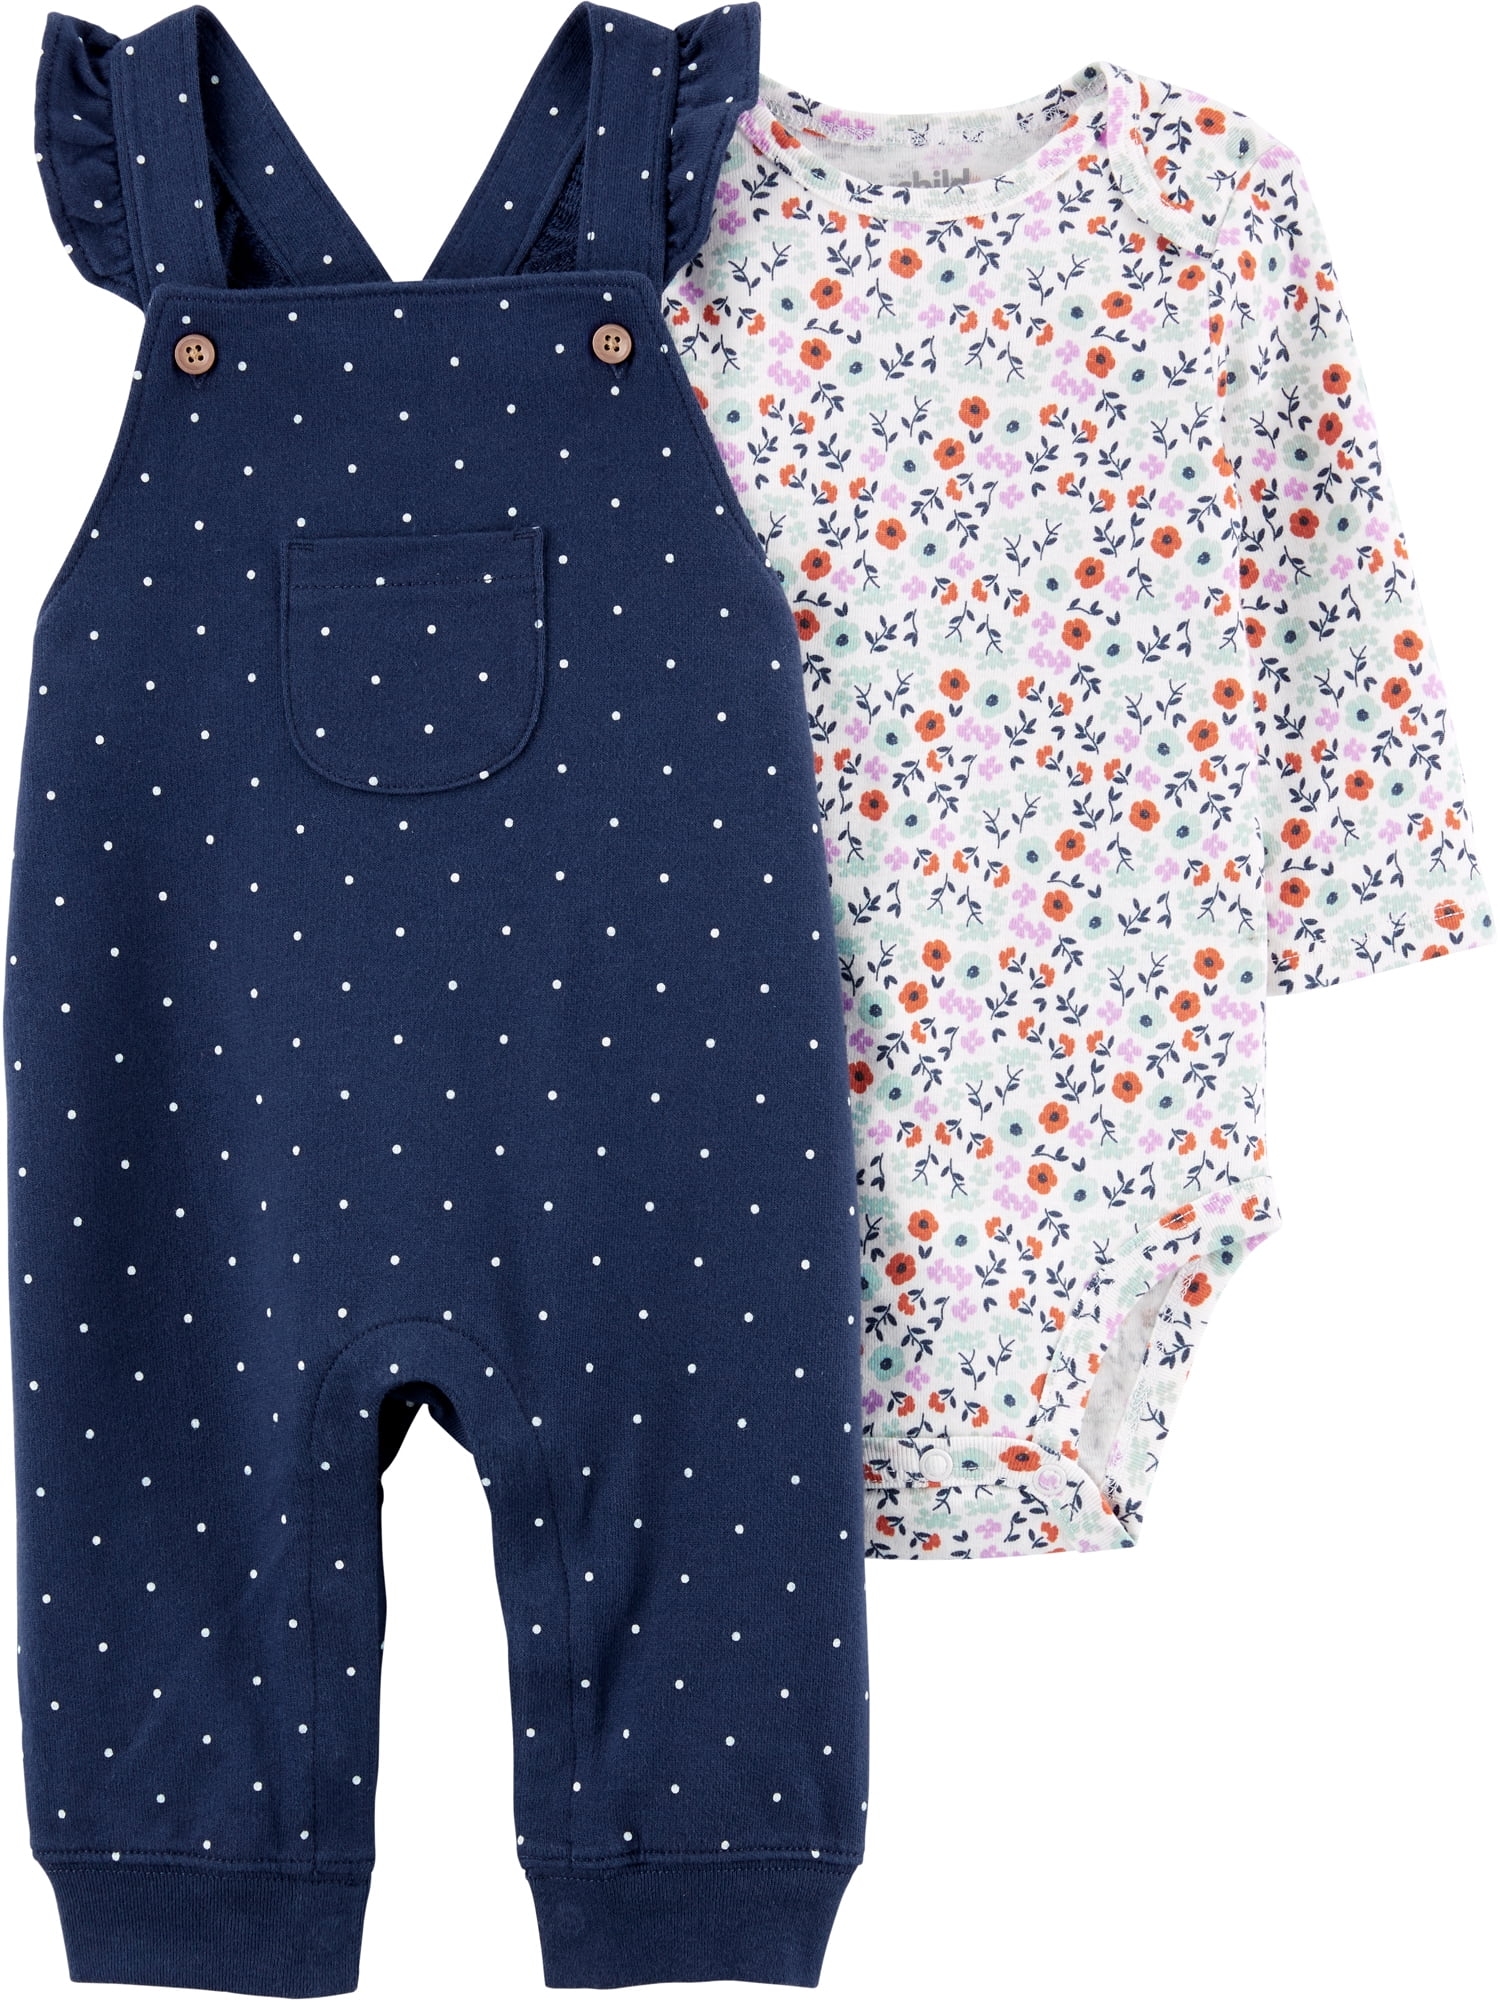 2PC Baby Girls Infants Long Sleeve Shirt+Dot Strap Dress Clothes Outfits Set 